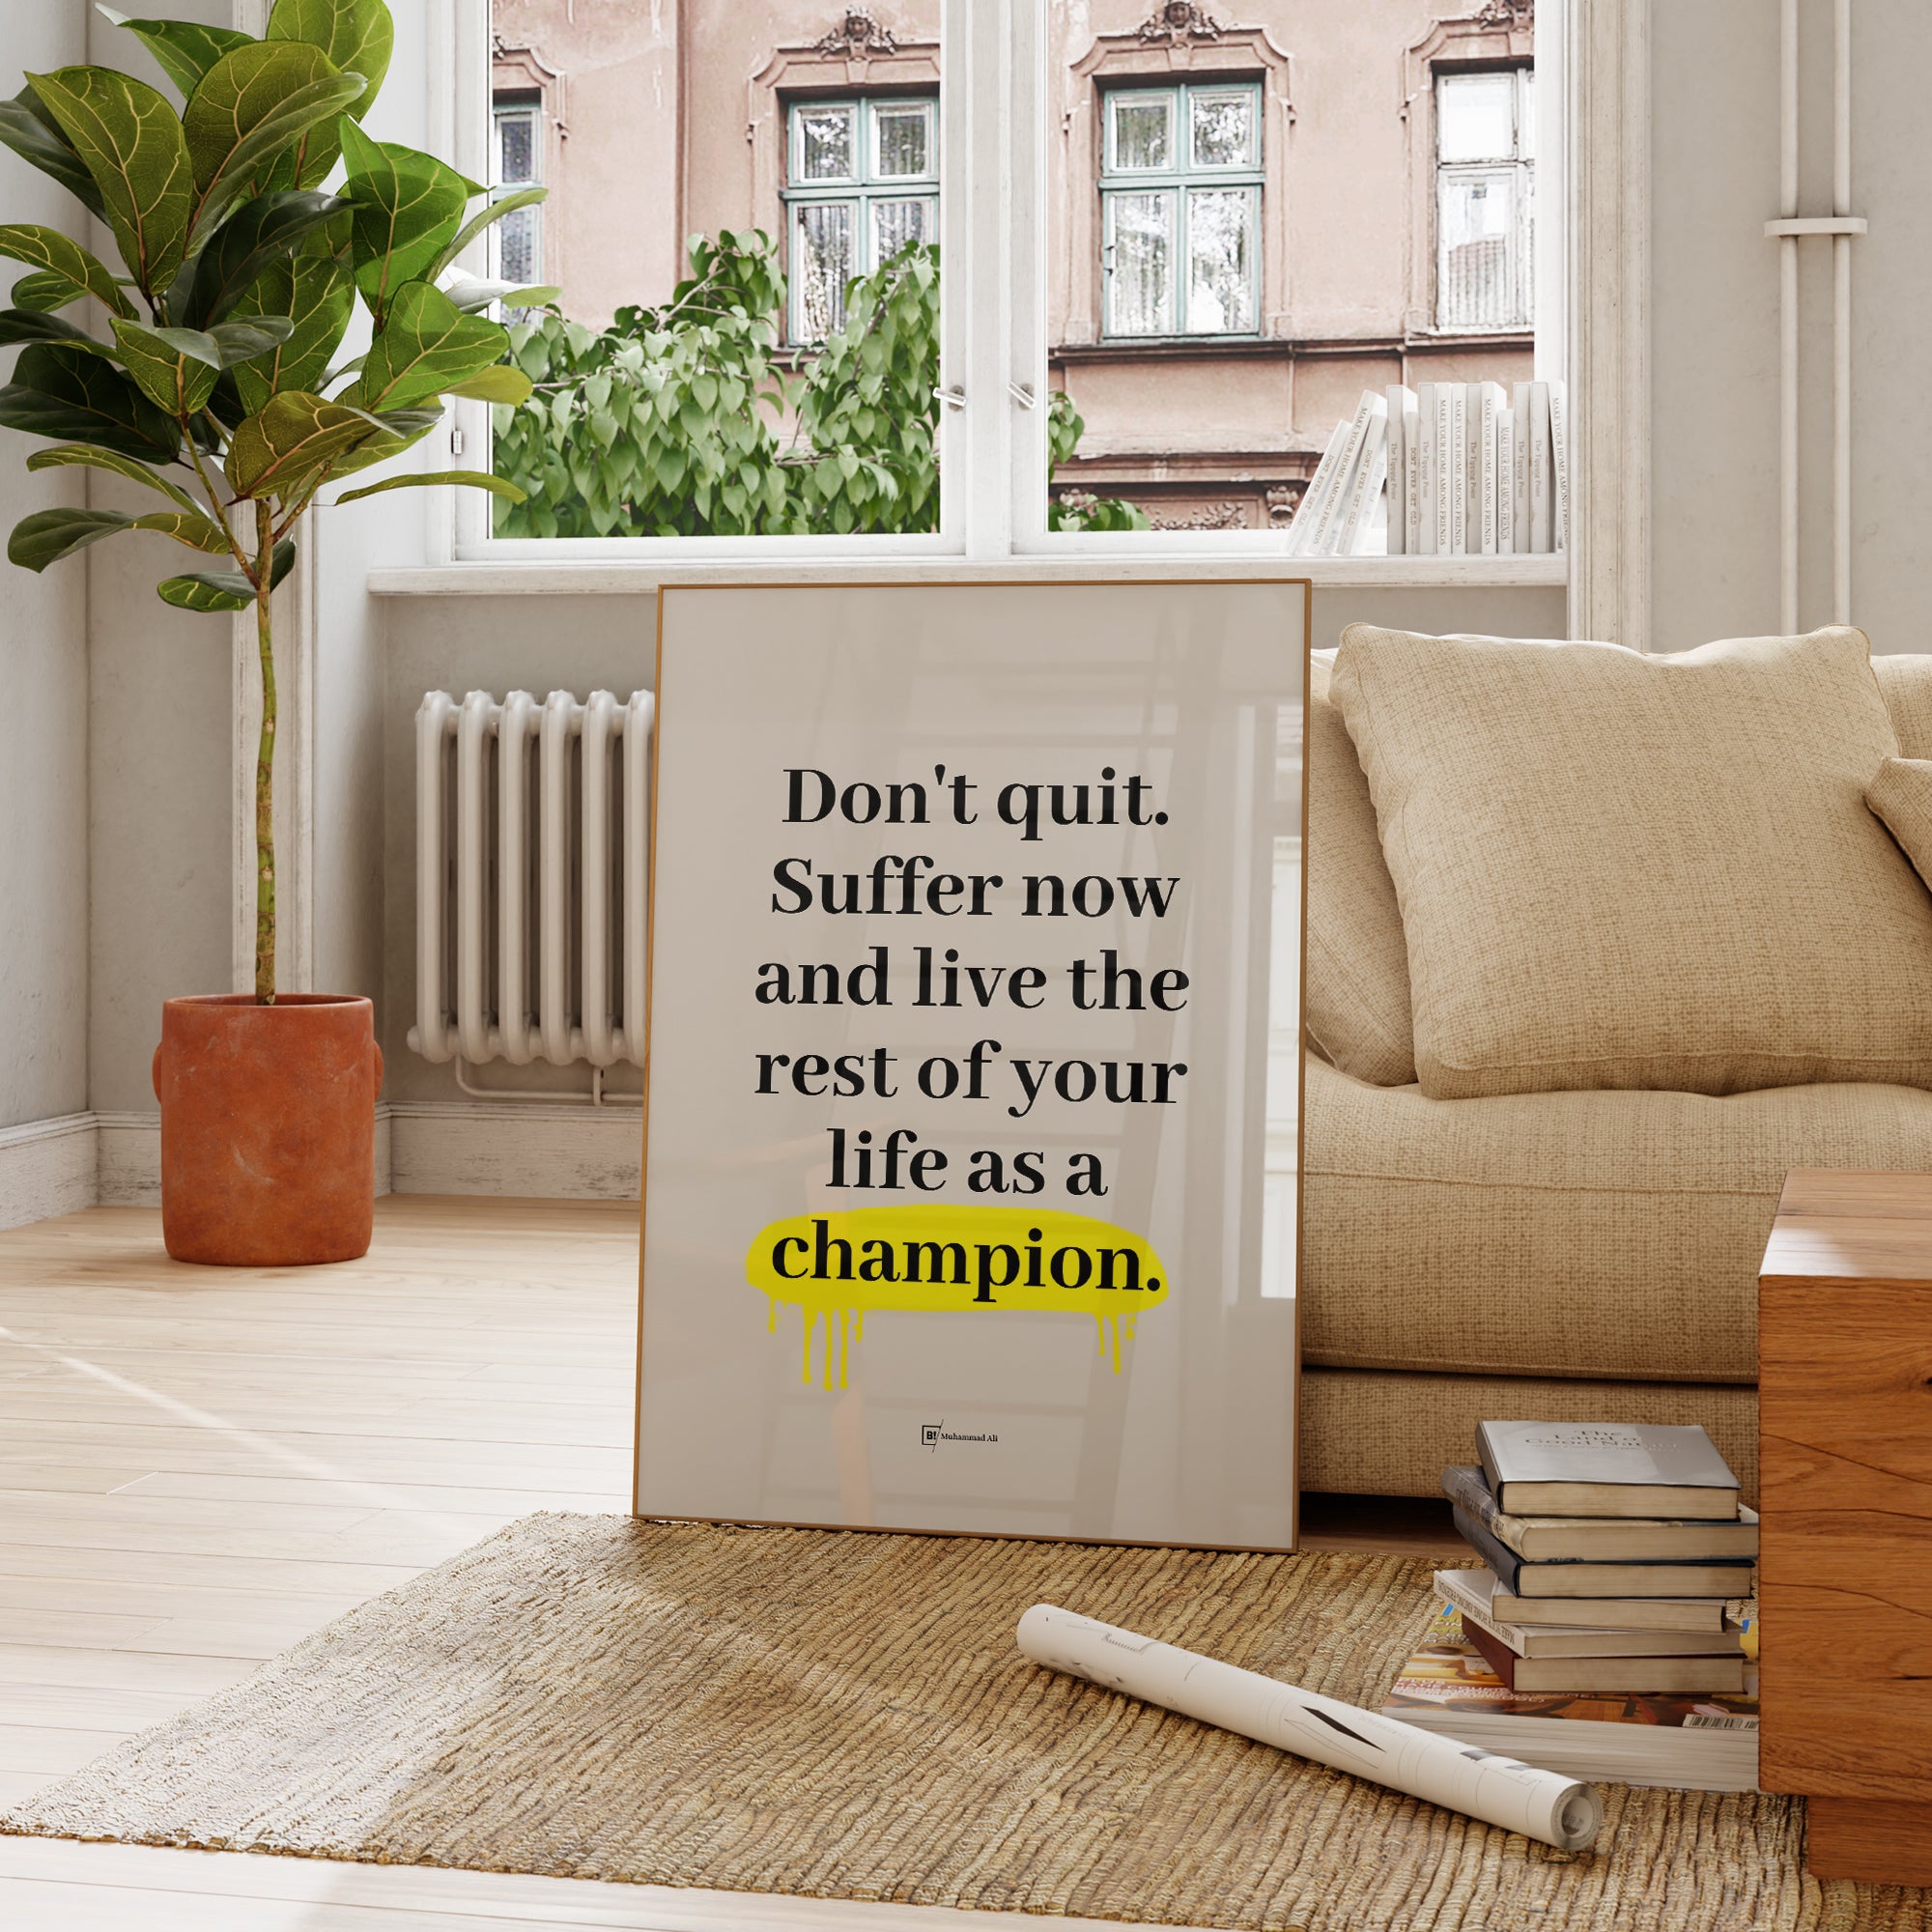 Be inspired by Muhammad Ali's famous "Don't quit. Suffer now and live the rest of your life as a champion" quote art print. This artwork was printed using the giclée process on archival acid-free paper and is presented in a french living room that captures its timeless beauty in every detail.